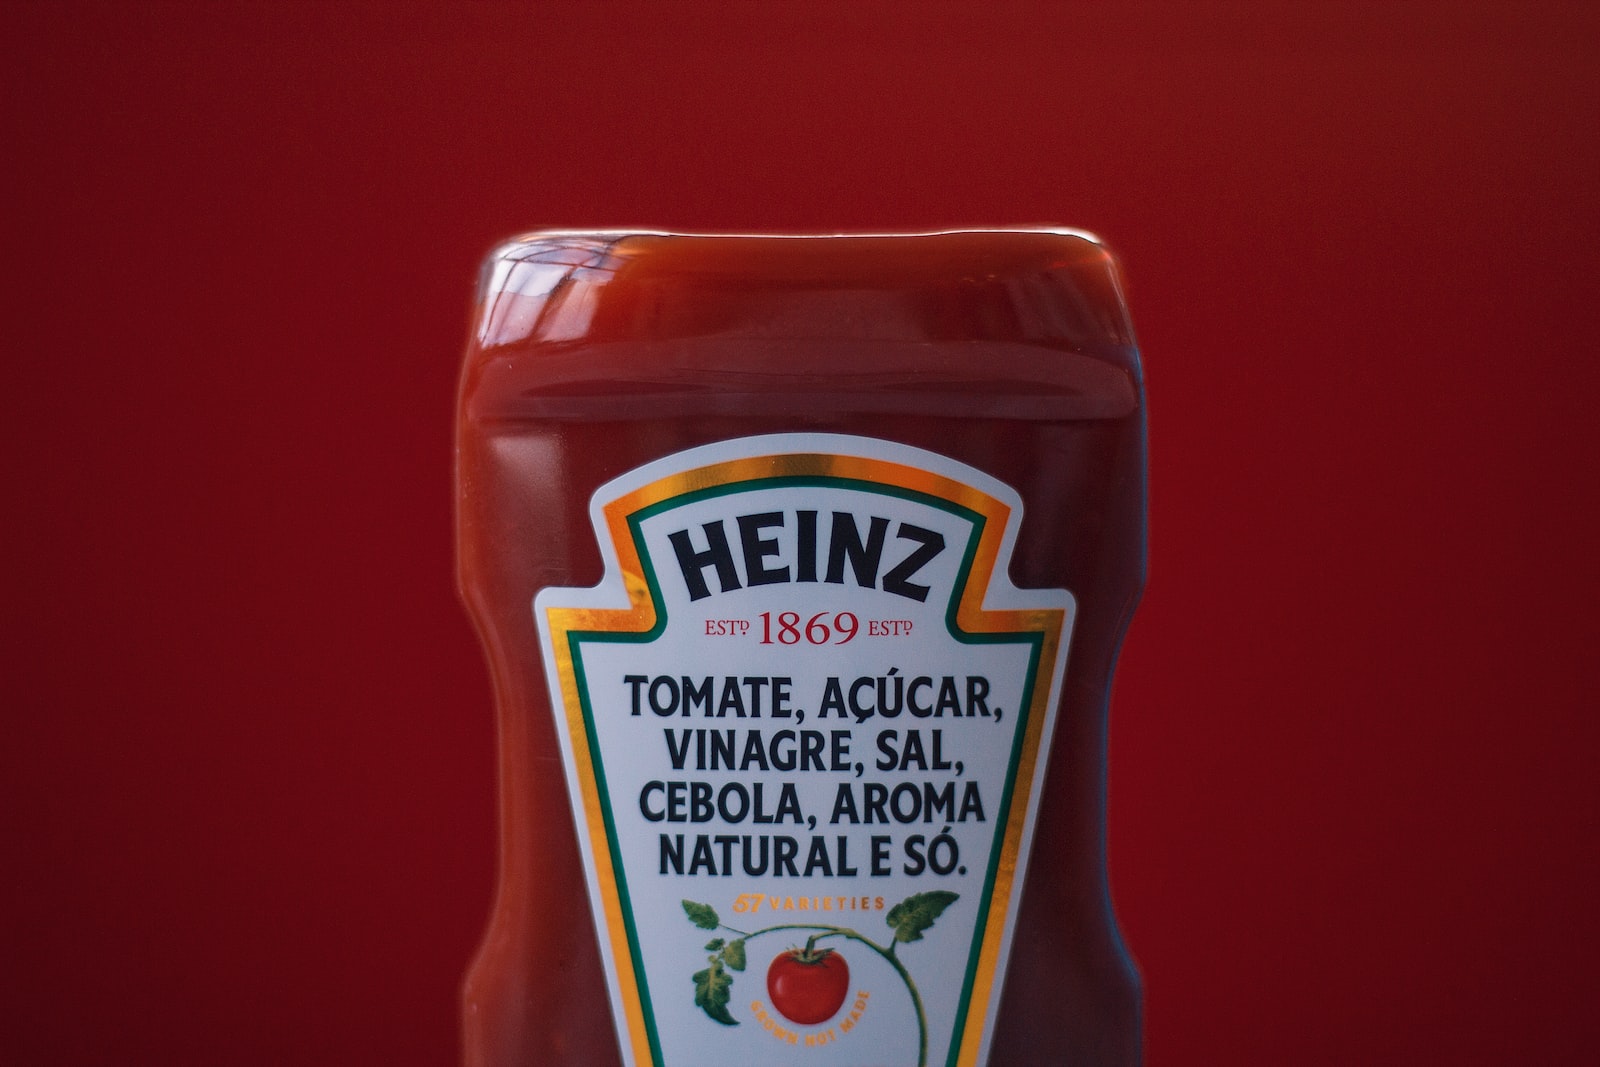 1869 Heinz tomato ketchup bottle close-up photography